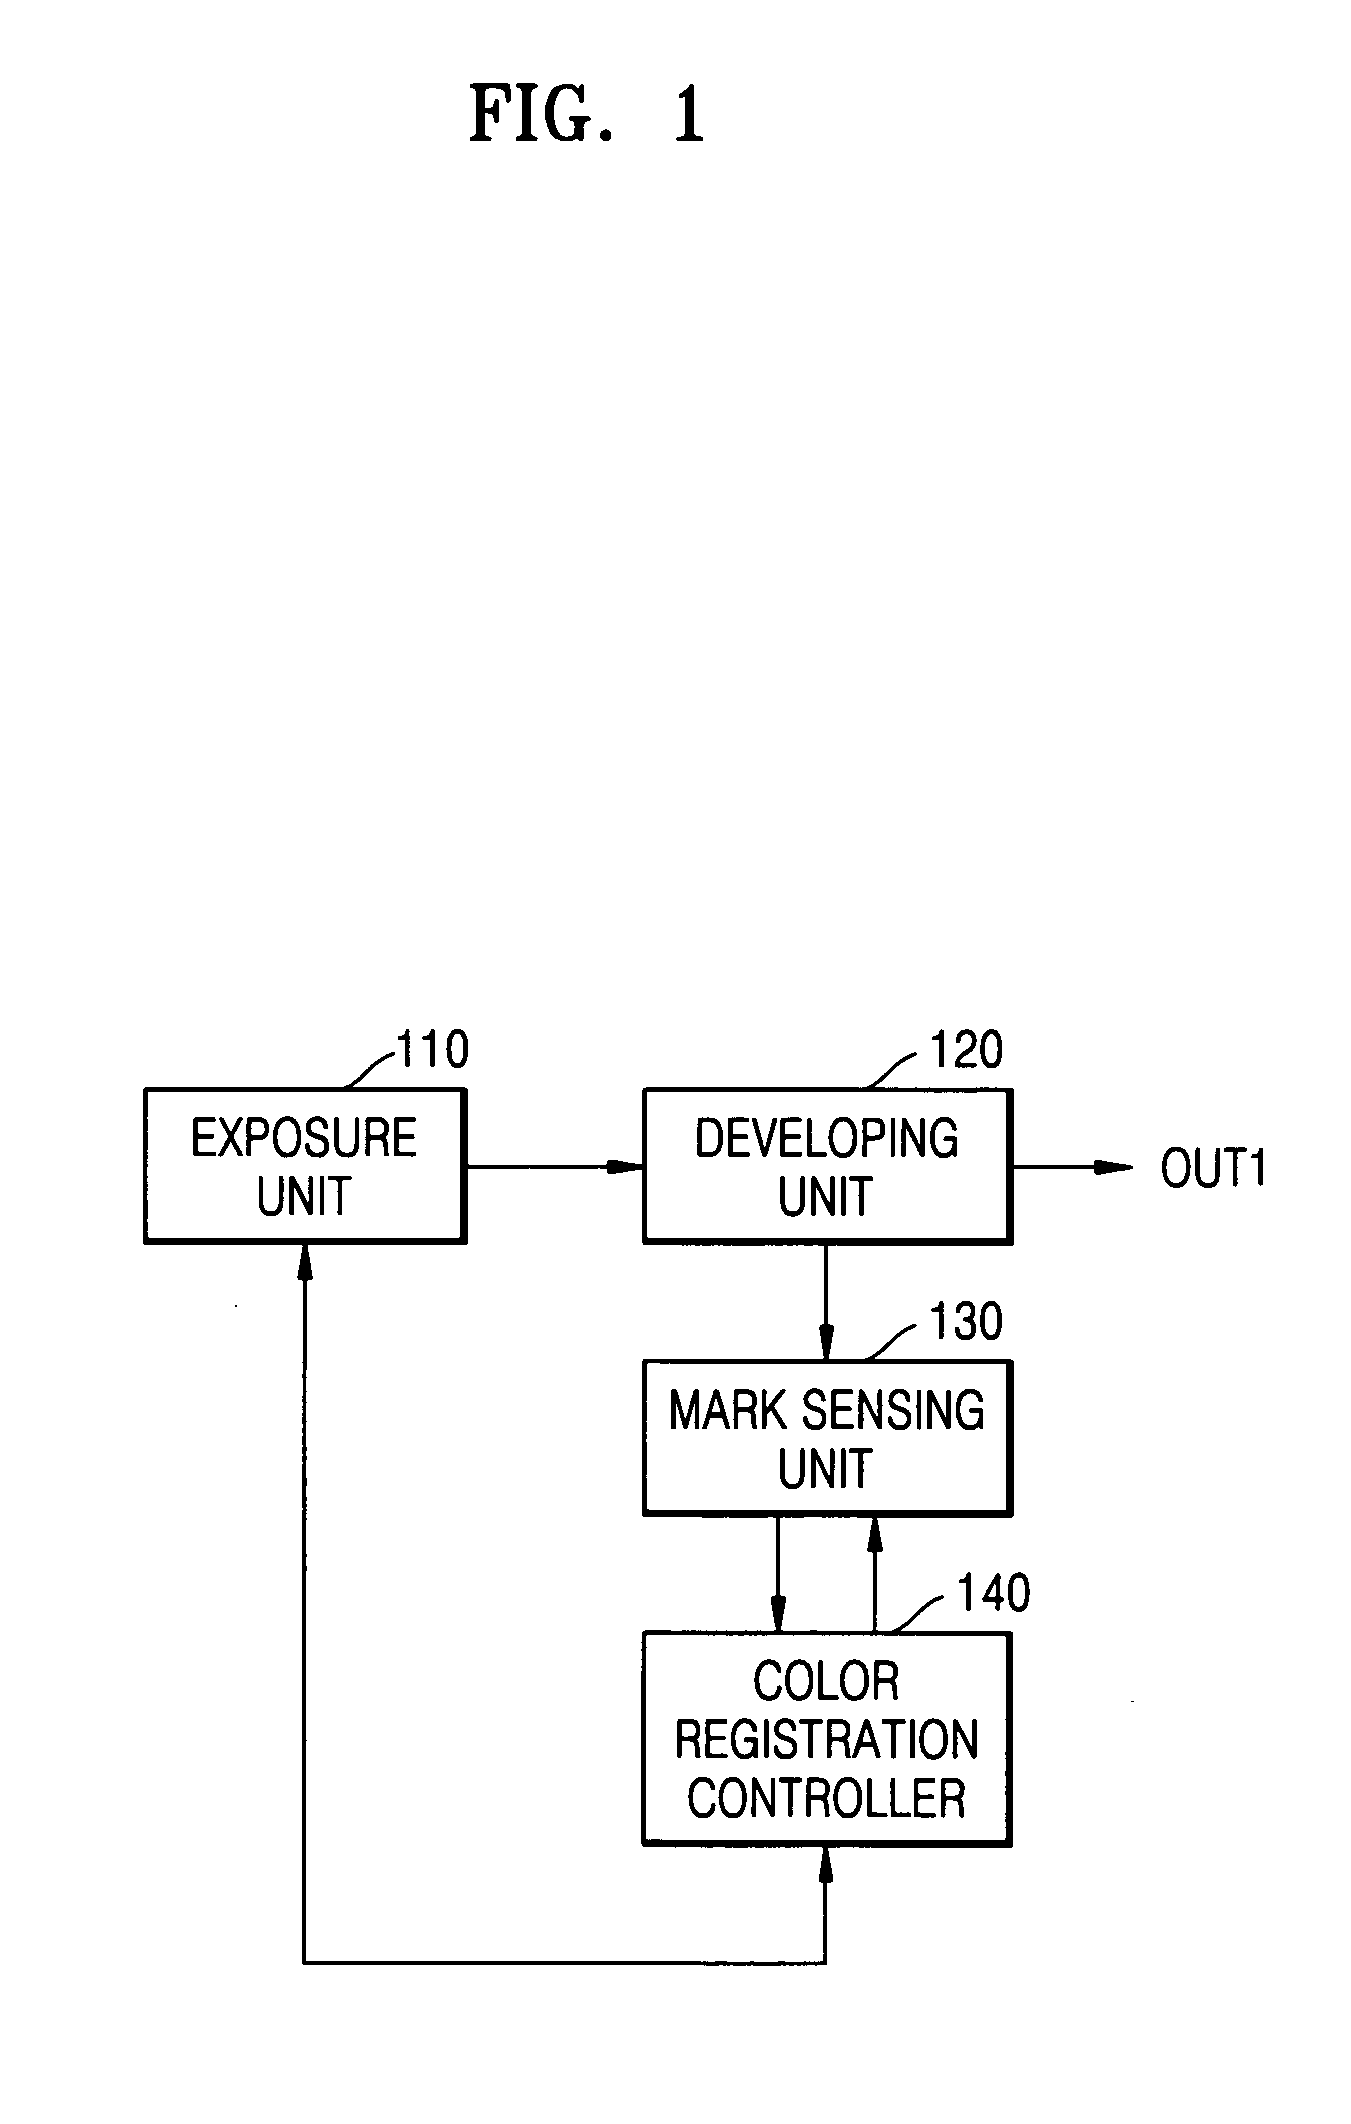 Apparatus and method of correcting color registration in electrophotographic printer